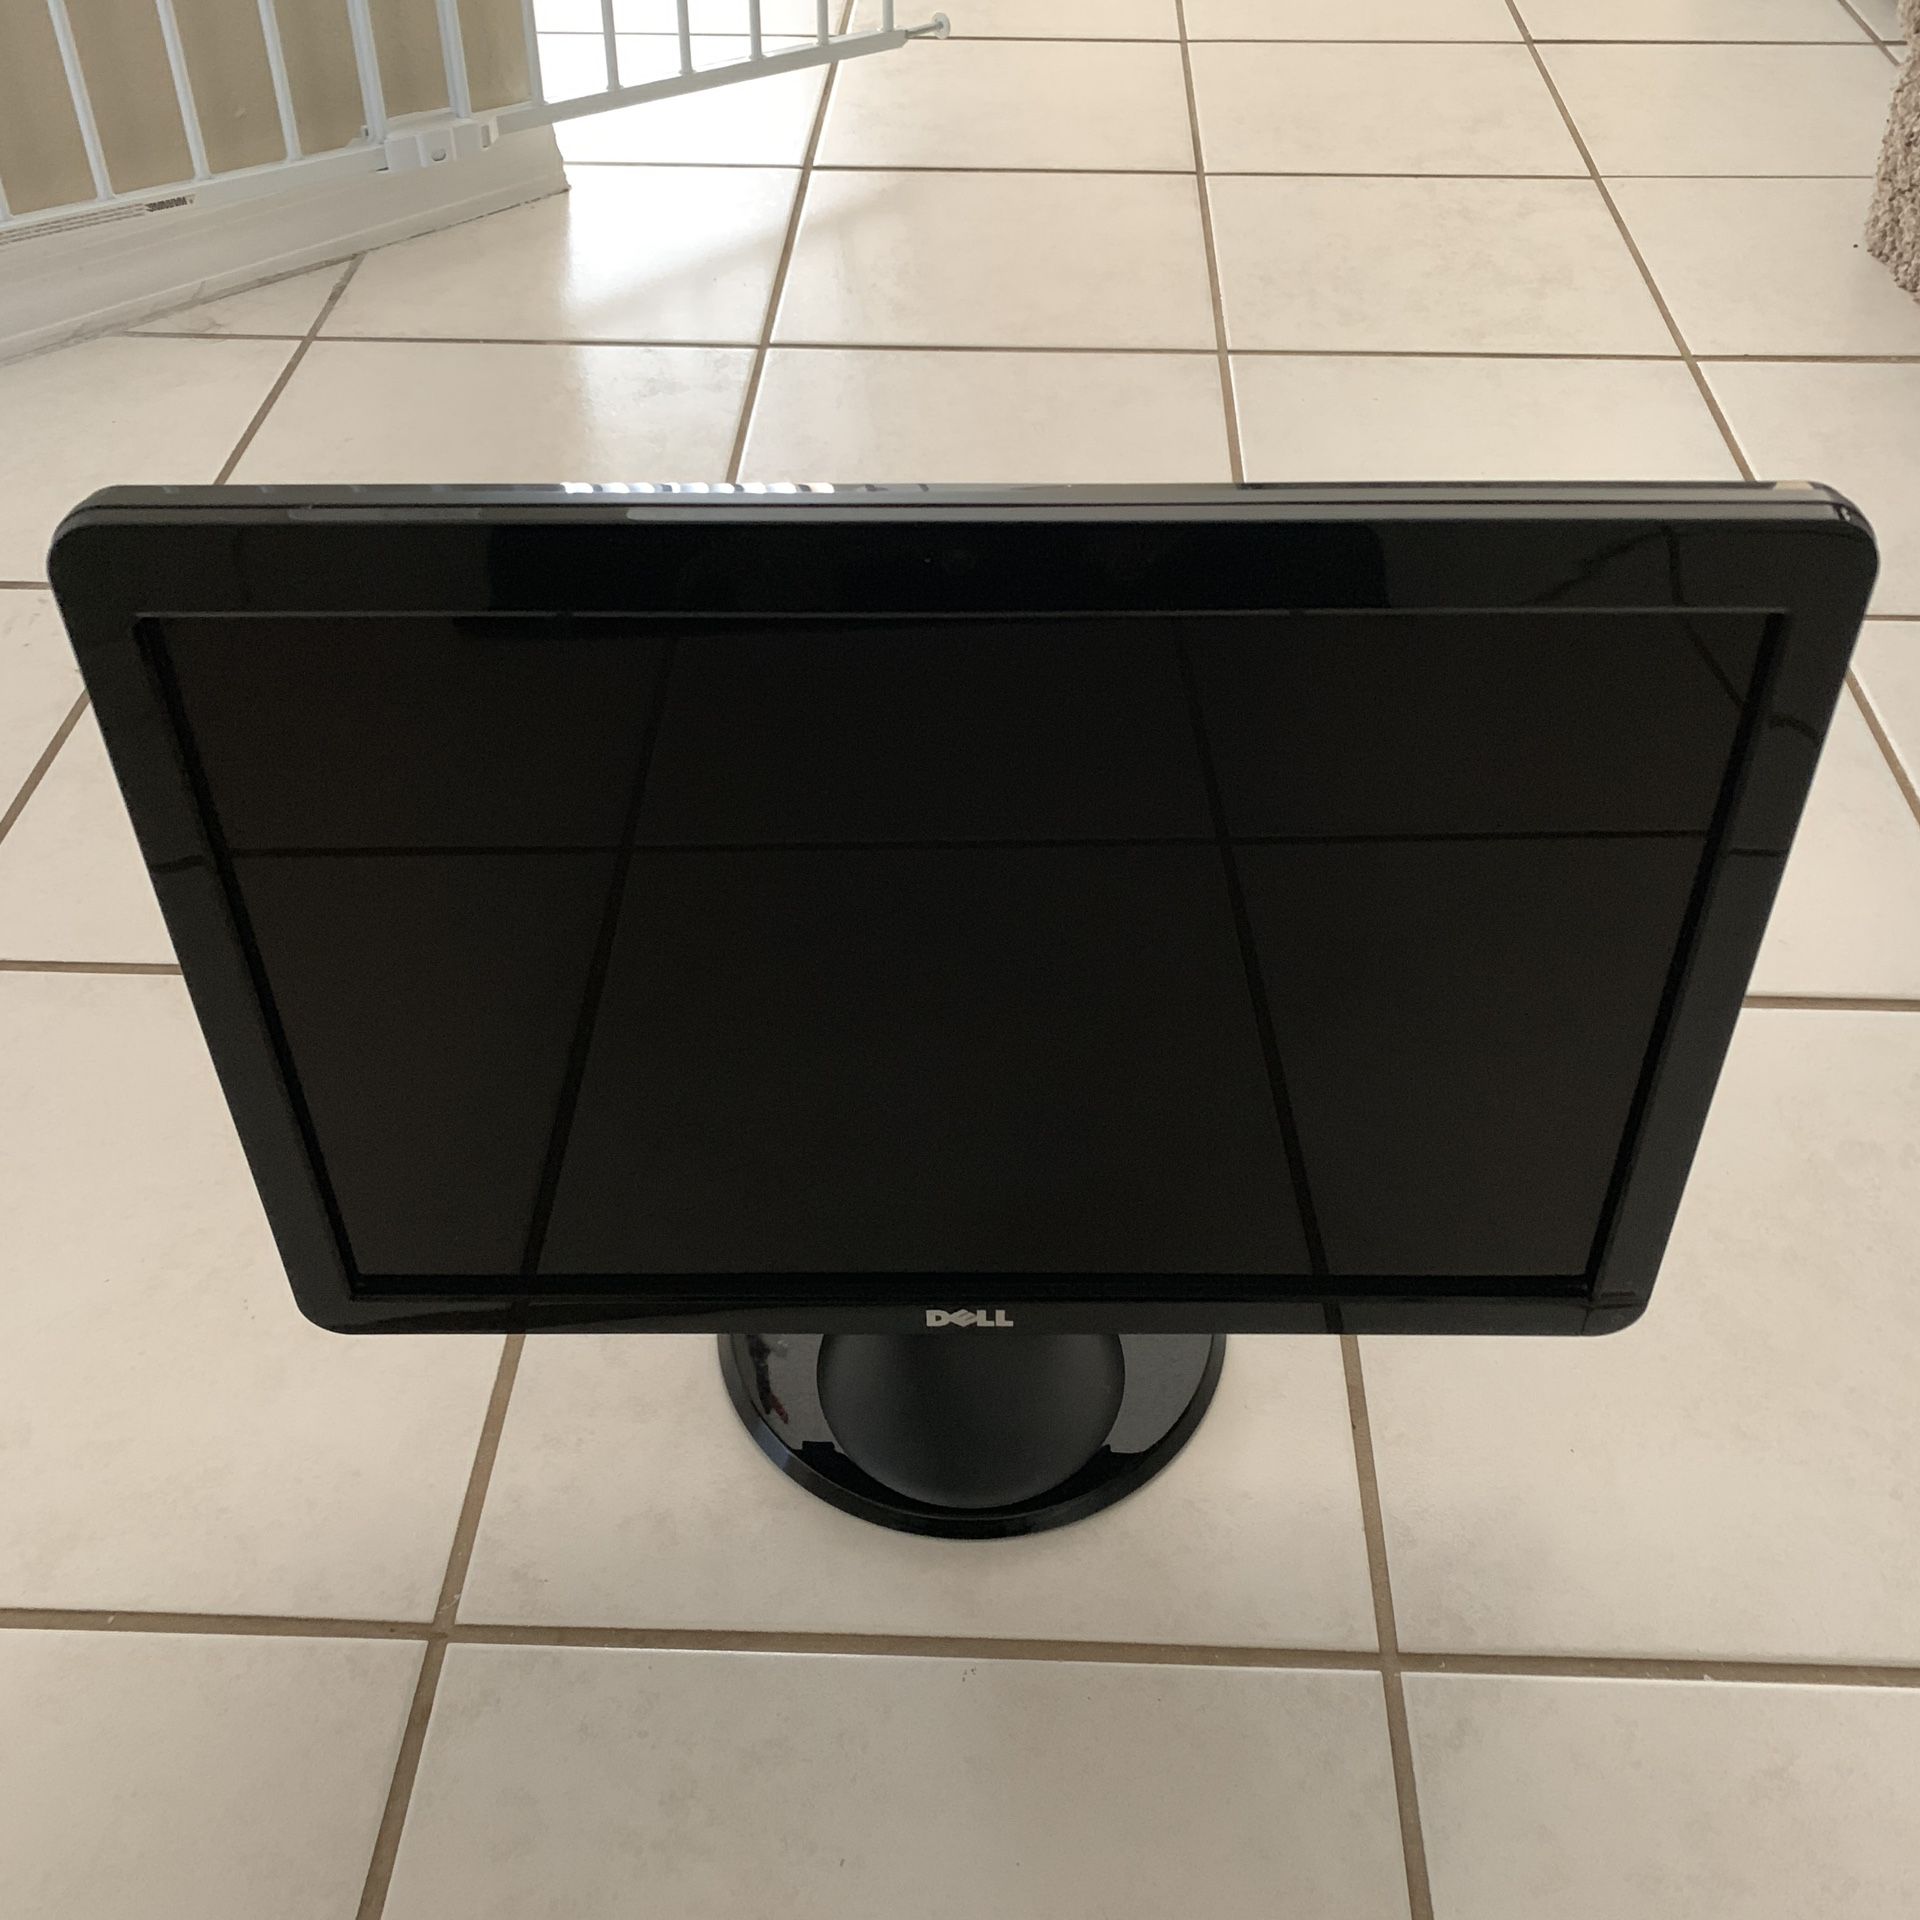 Dell Sp09wc 1680 X 1050 Resolution Widescreen Lcd Flat Panel Computer Monitor Display For Sale In Sunrise Fl Offerup